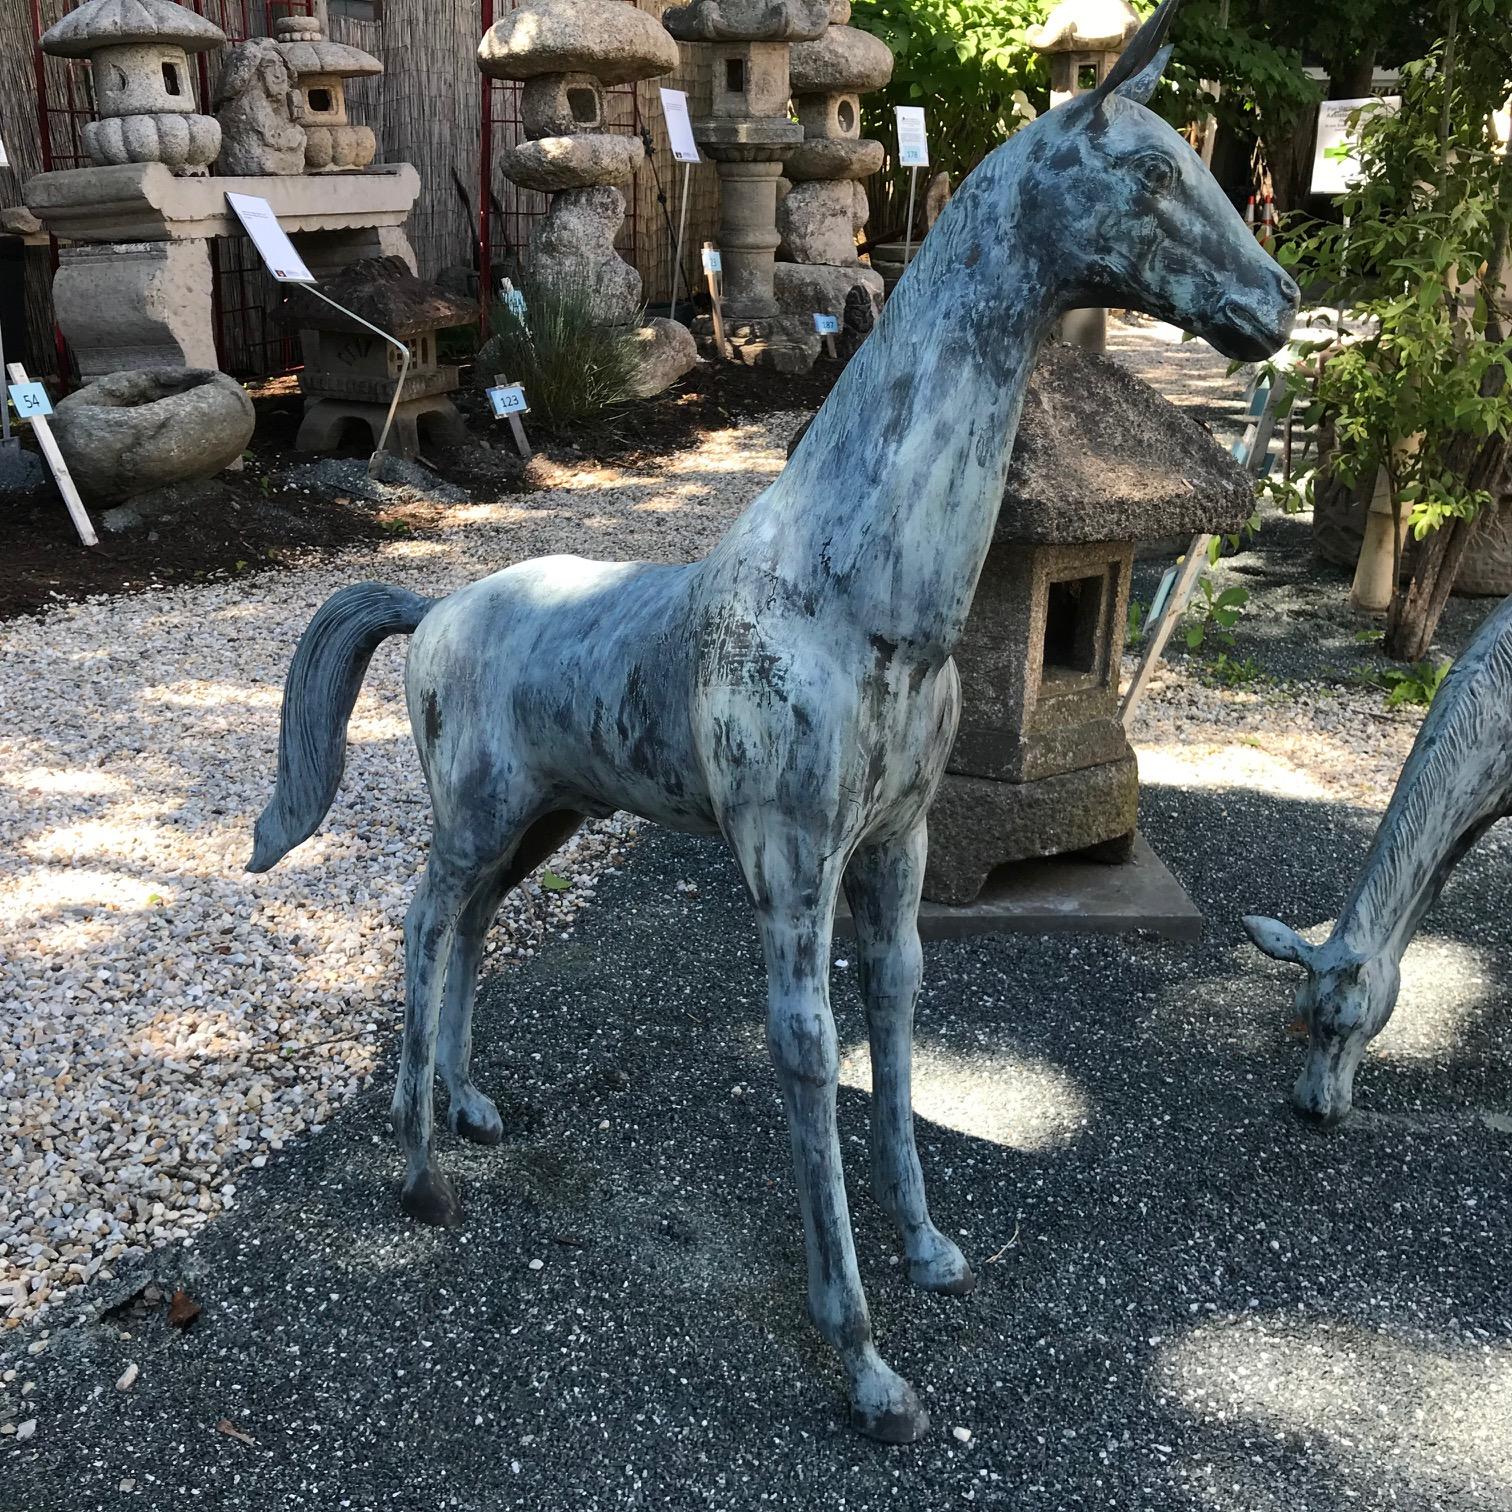 This wonderful pair of tall Japanese hand caste solid bronze horses could be the centrepiece or prime accents in your garden.

Finely hand cast, each boasts a handsome Verdigris patina.

Their bodies are sleek and their faces are beautifully